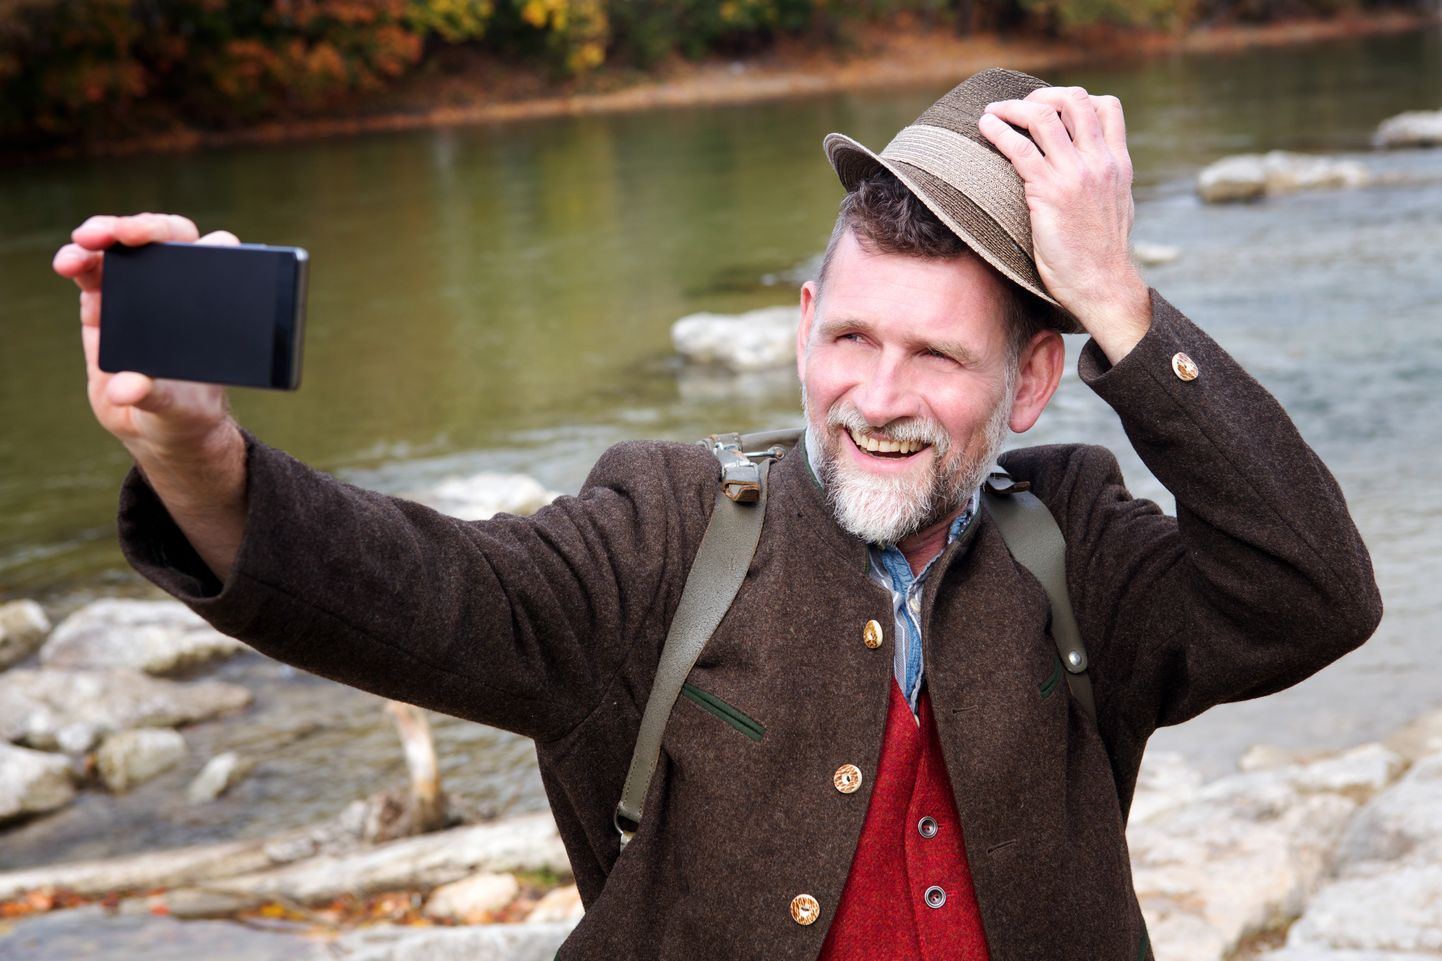 bavarian man in his 50s standing by river and taking a selfie